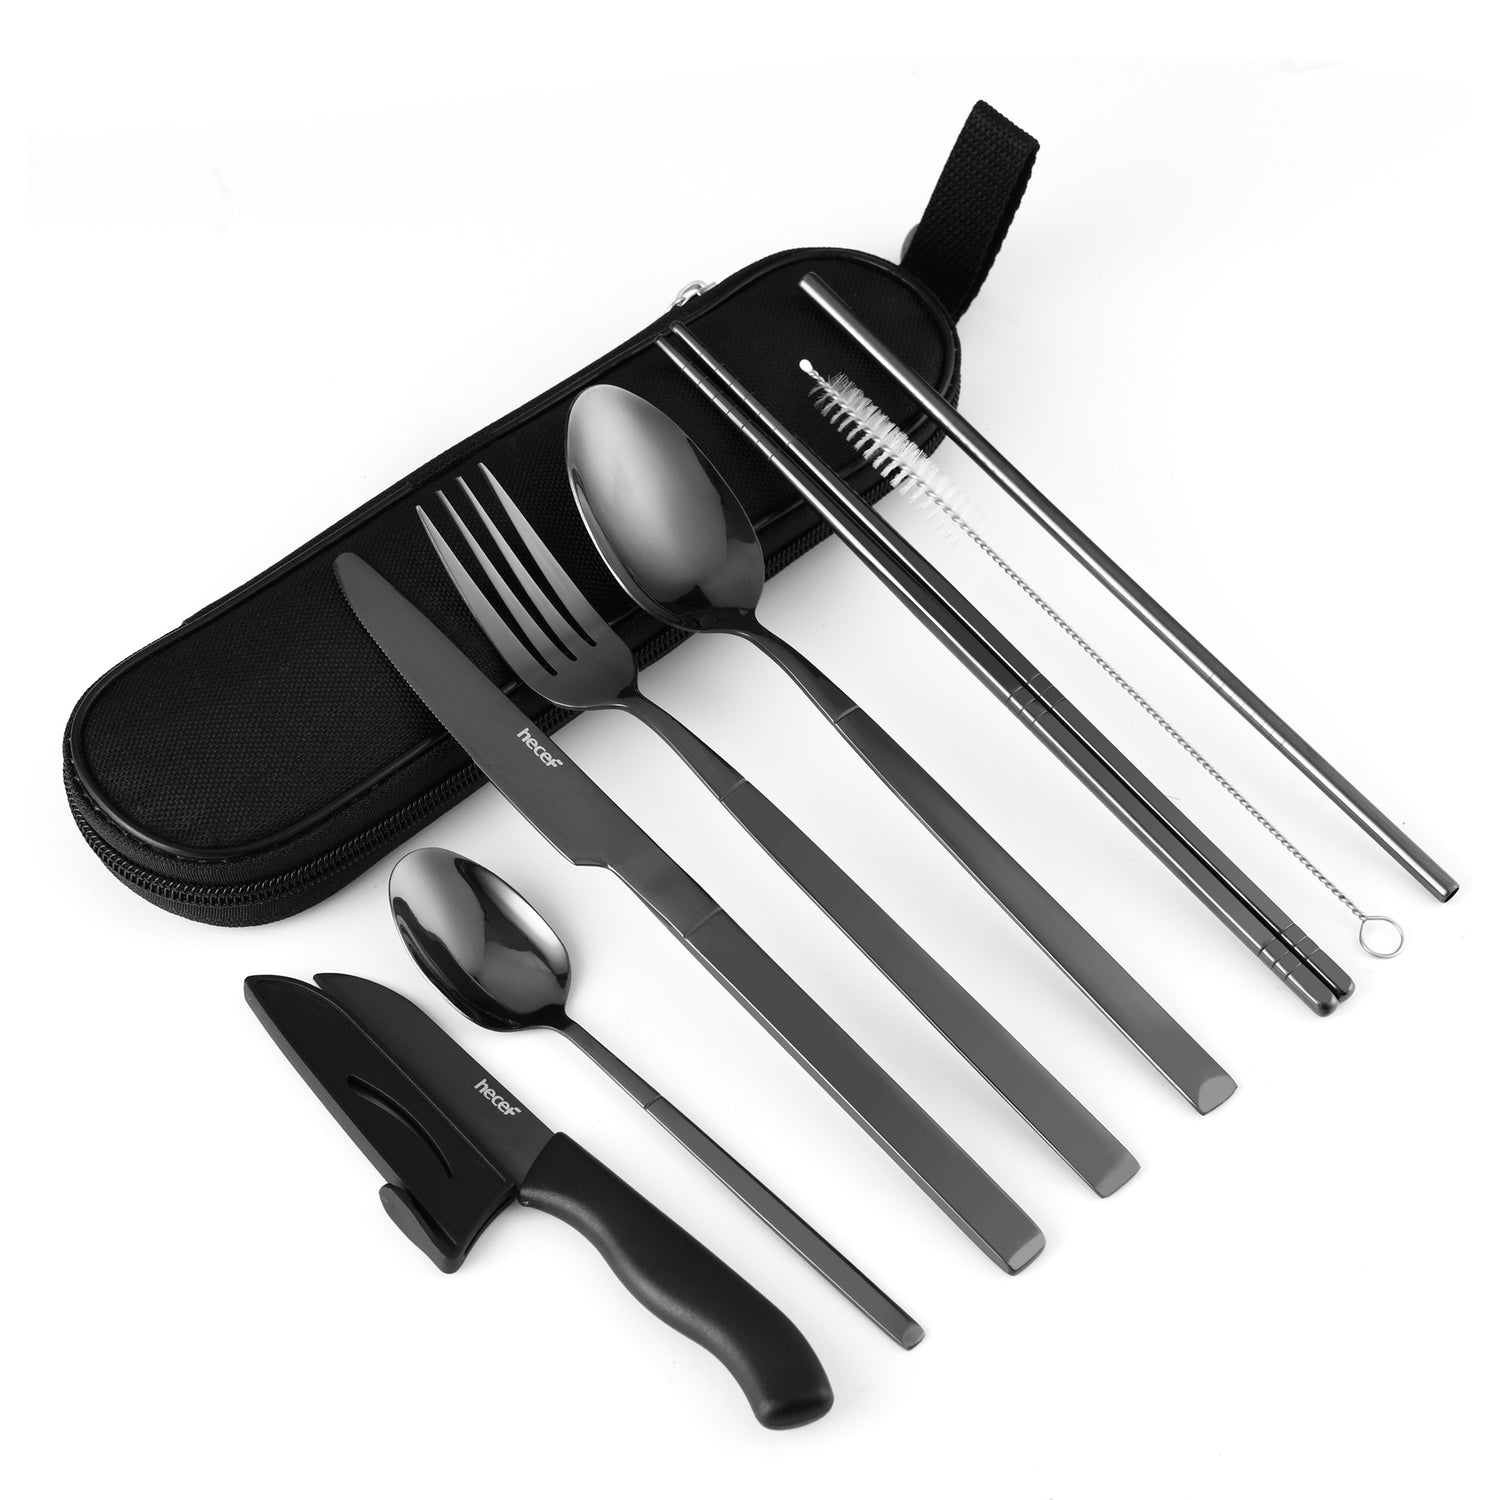 Hecef 9 Pieces Camping Cutlery Set with Compact Carrying Case, Reusable 18/0 Stainless Steel Utensils, Handy Flatware Set for Work, School, Camping and Travel - Hecef Kitchen